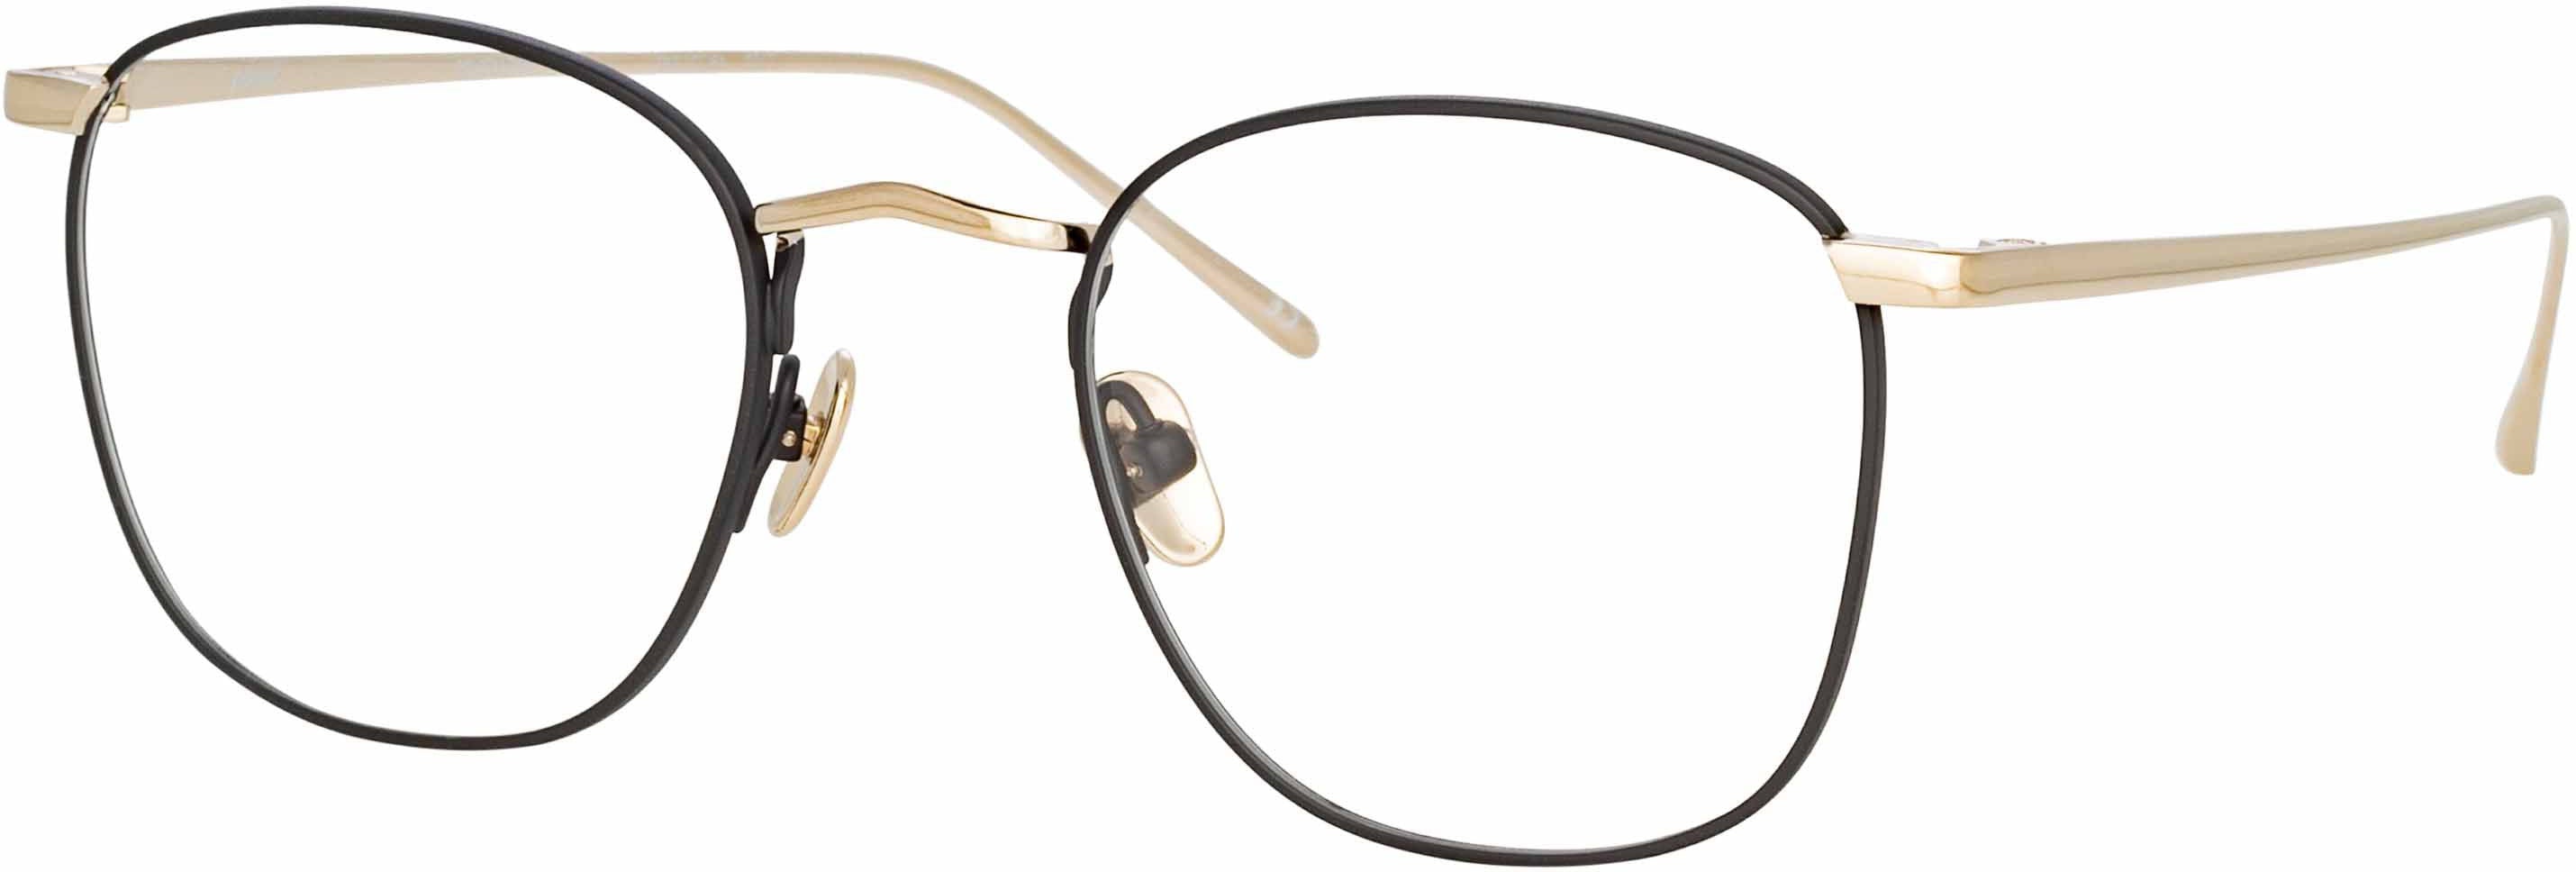 Square Optical Frame in Light Gold and Black (C20)